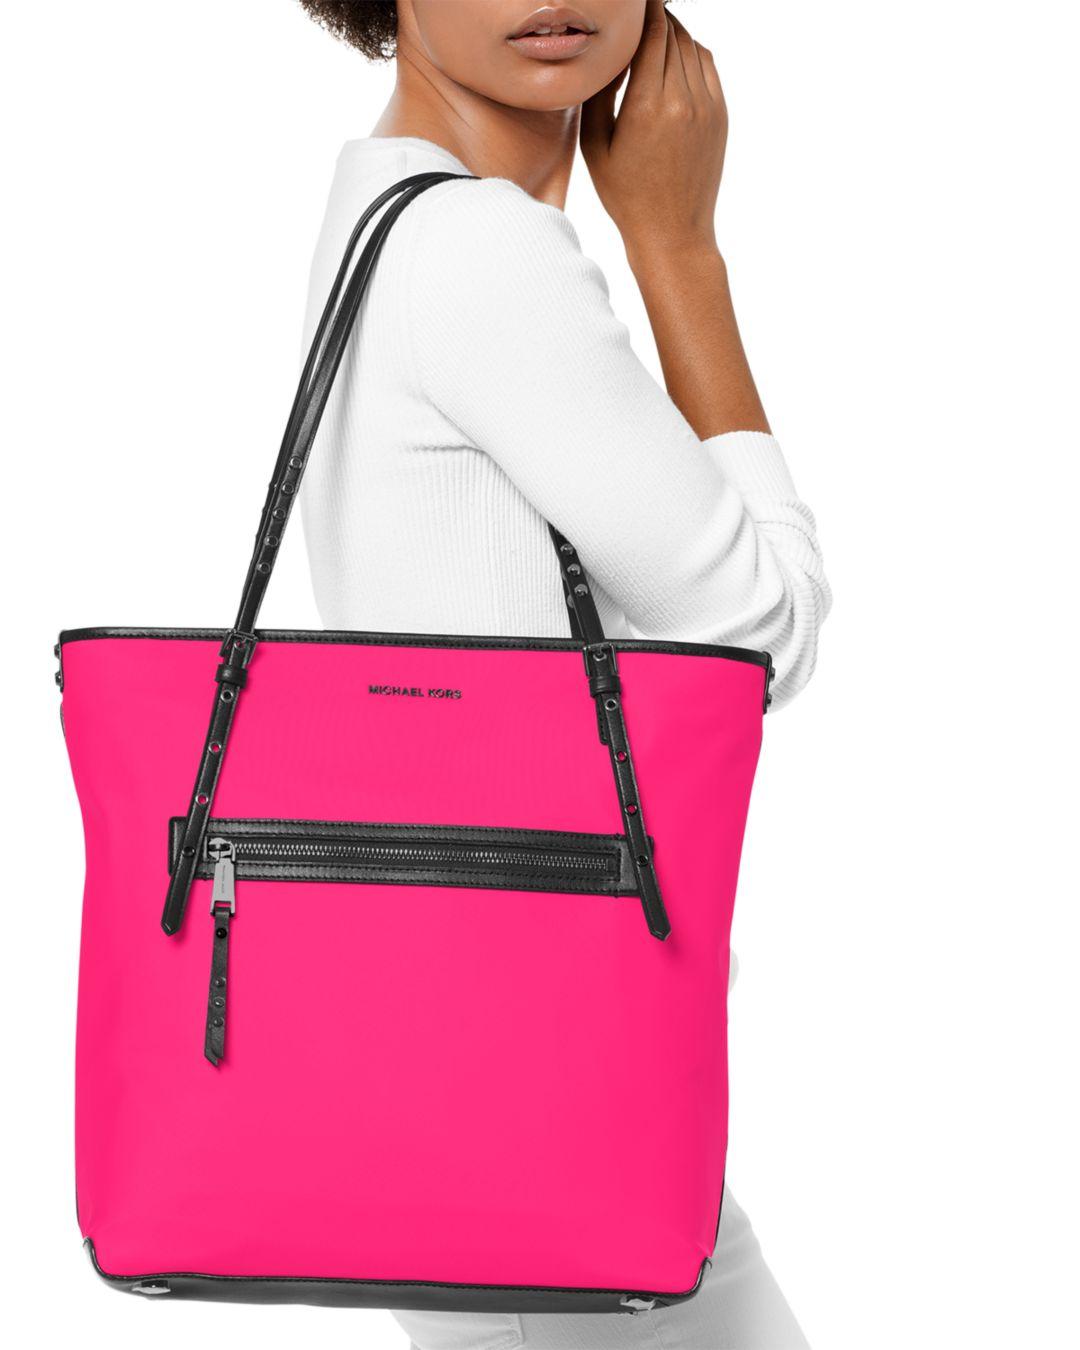 MICHAEL Michael Kors Synthetic Large Leila Neon Nylon Tote in Neon Yellow  (Pink) - Lyst